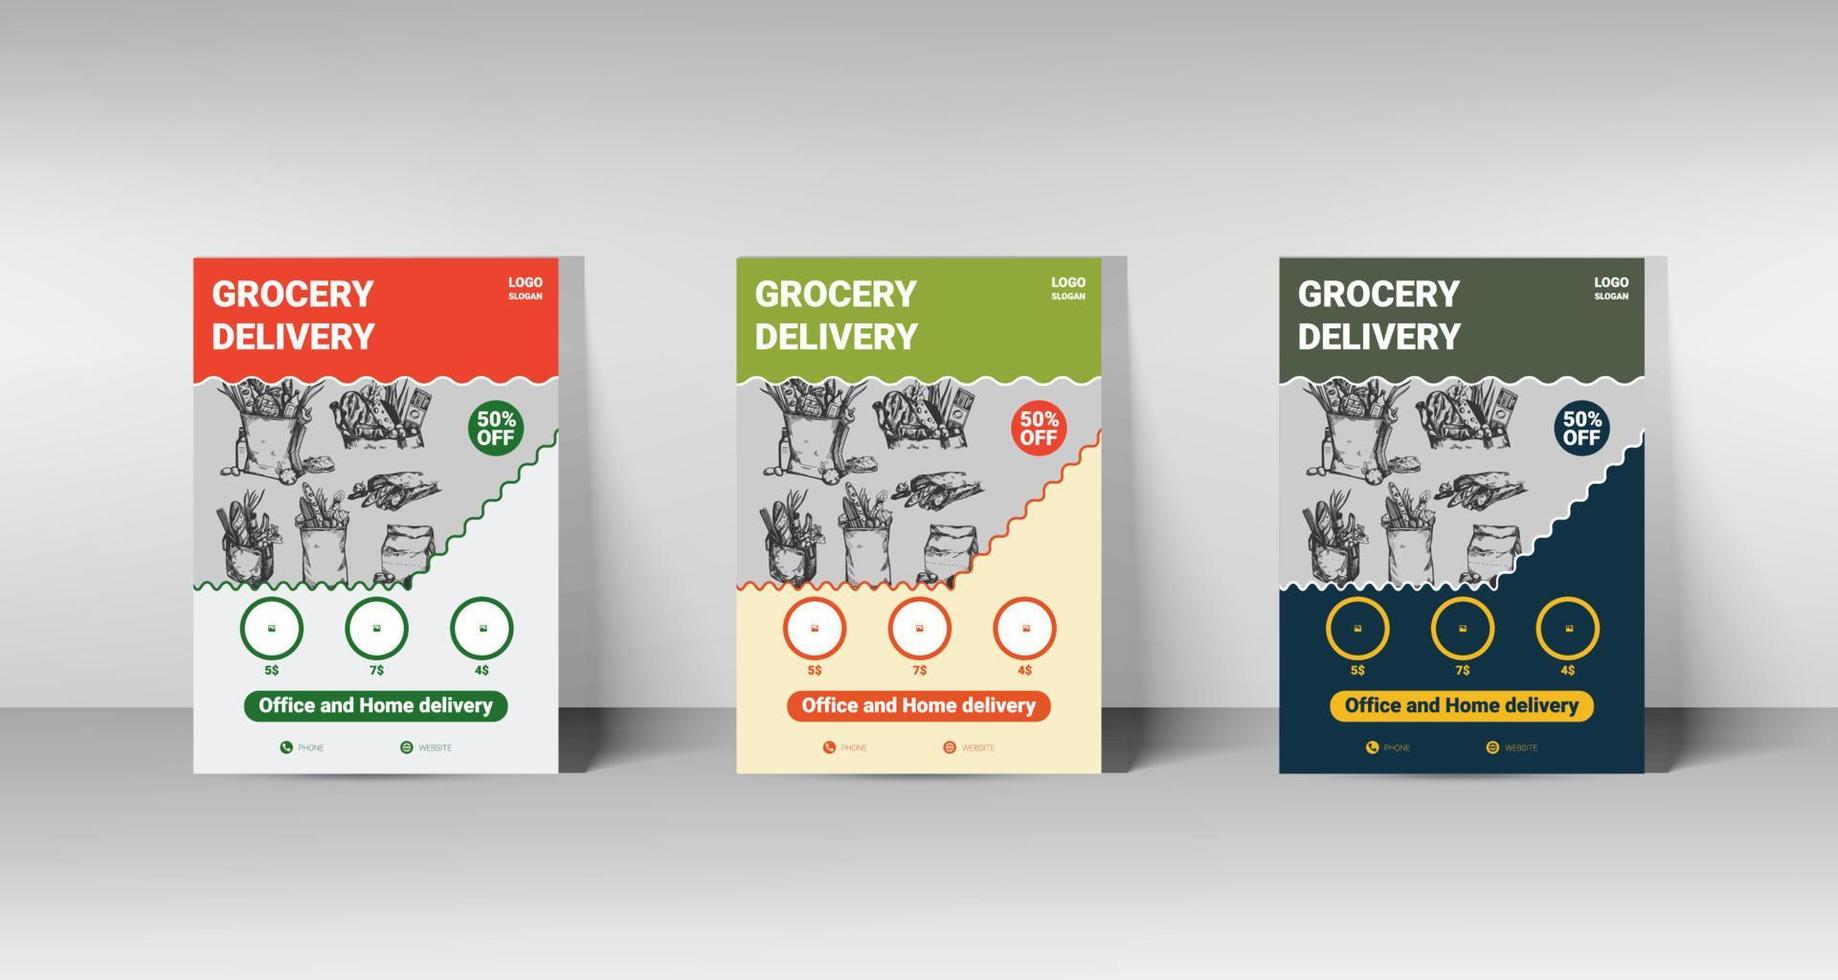 Grocery Delivery Flyer Design. A4 size flyer and fully editable file vector